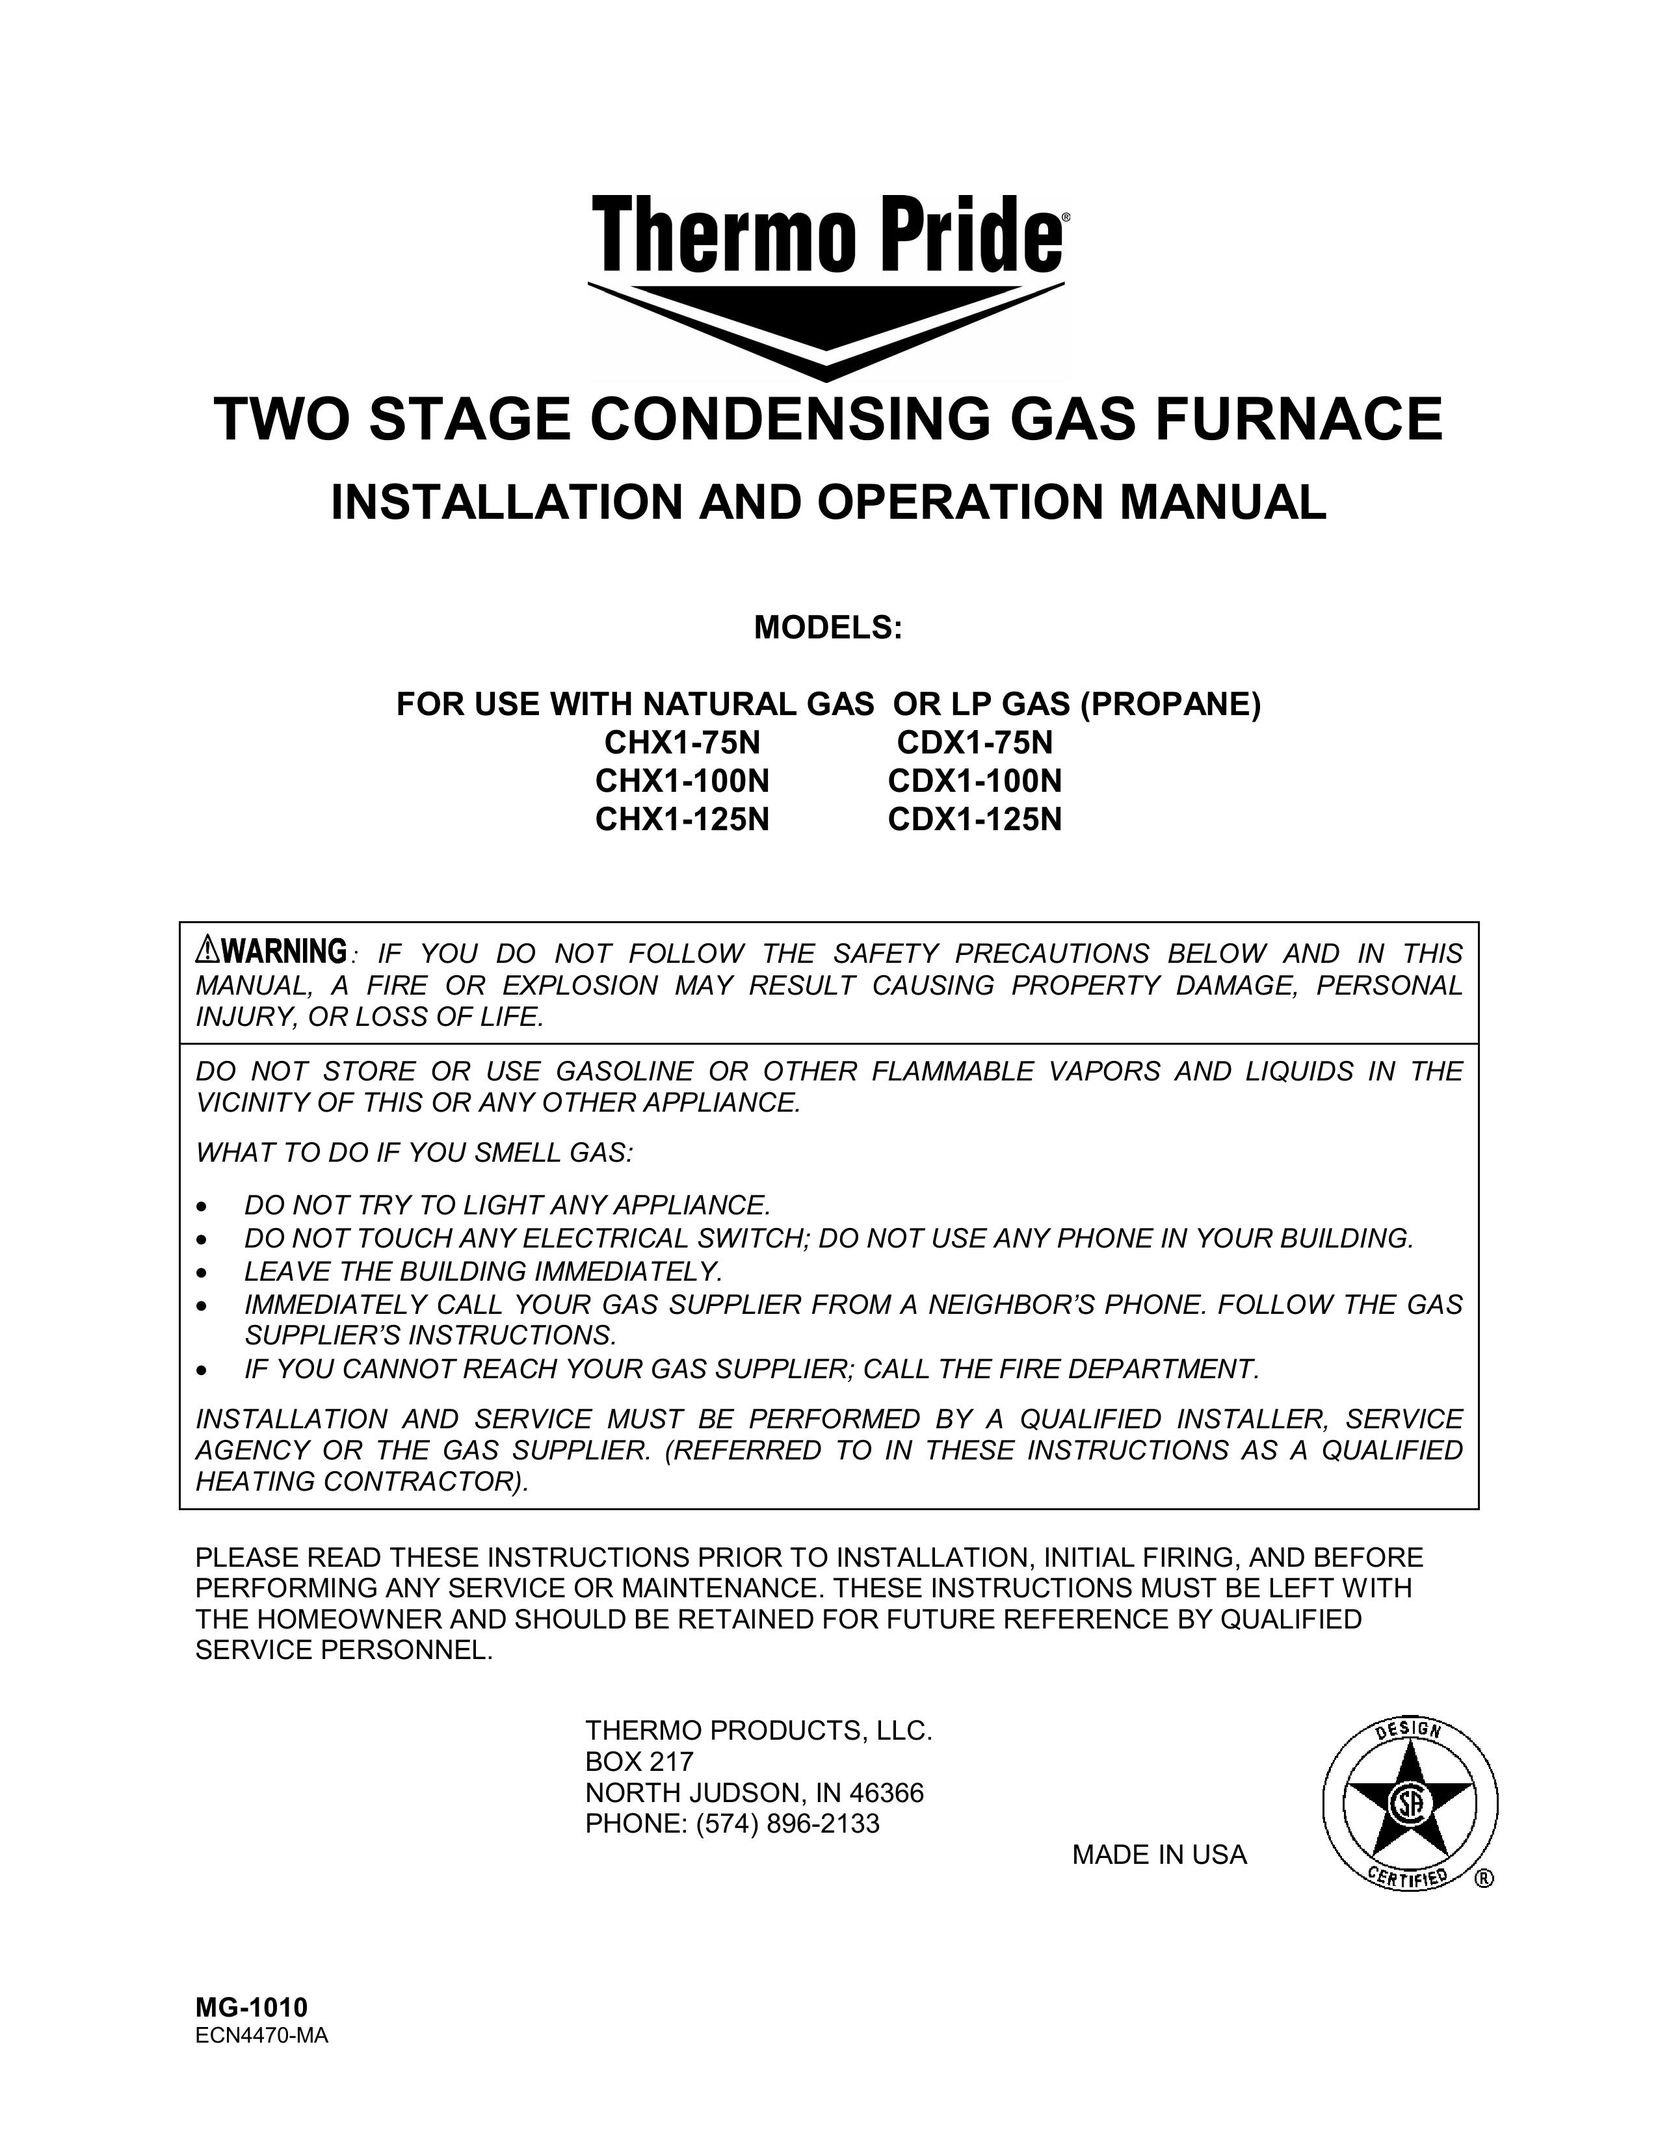 Thermo Products CHX1-75N Furnace User Manual